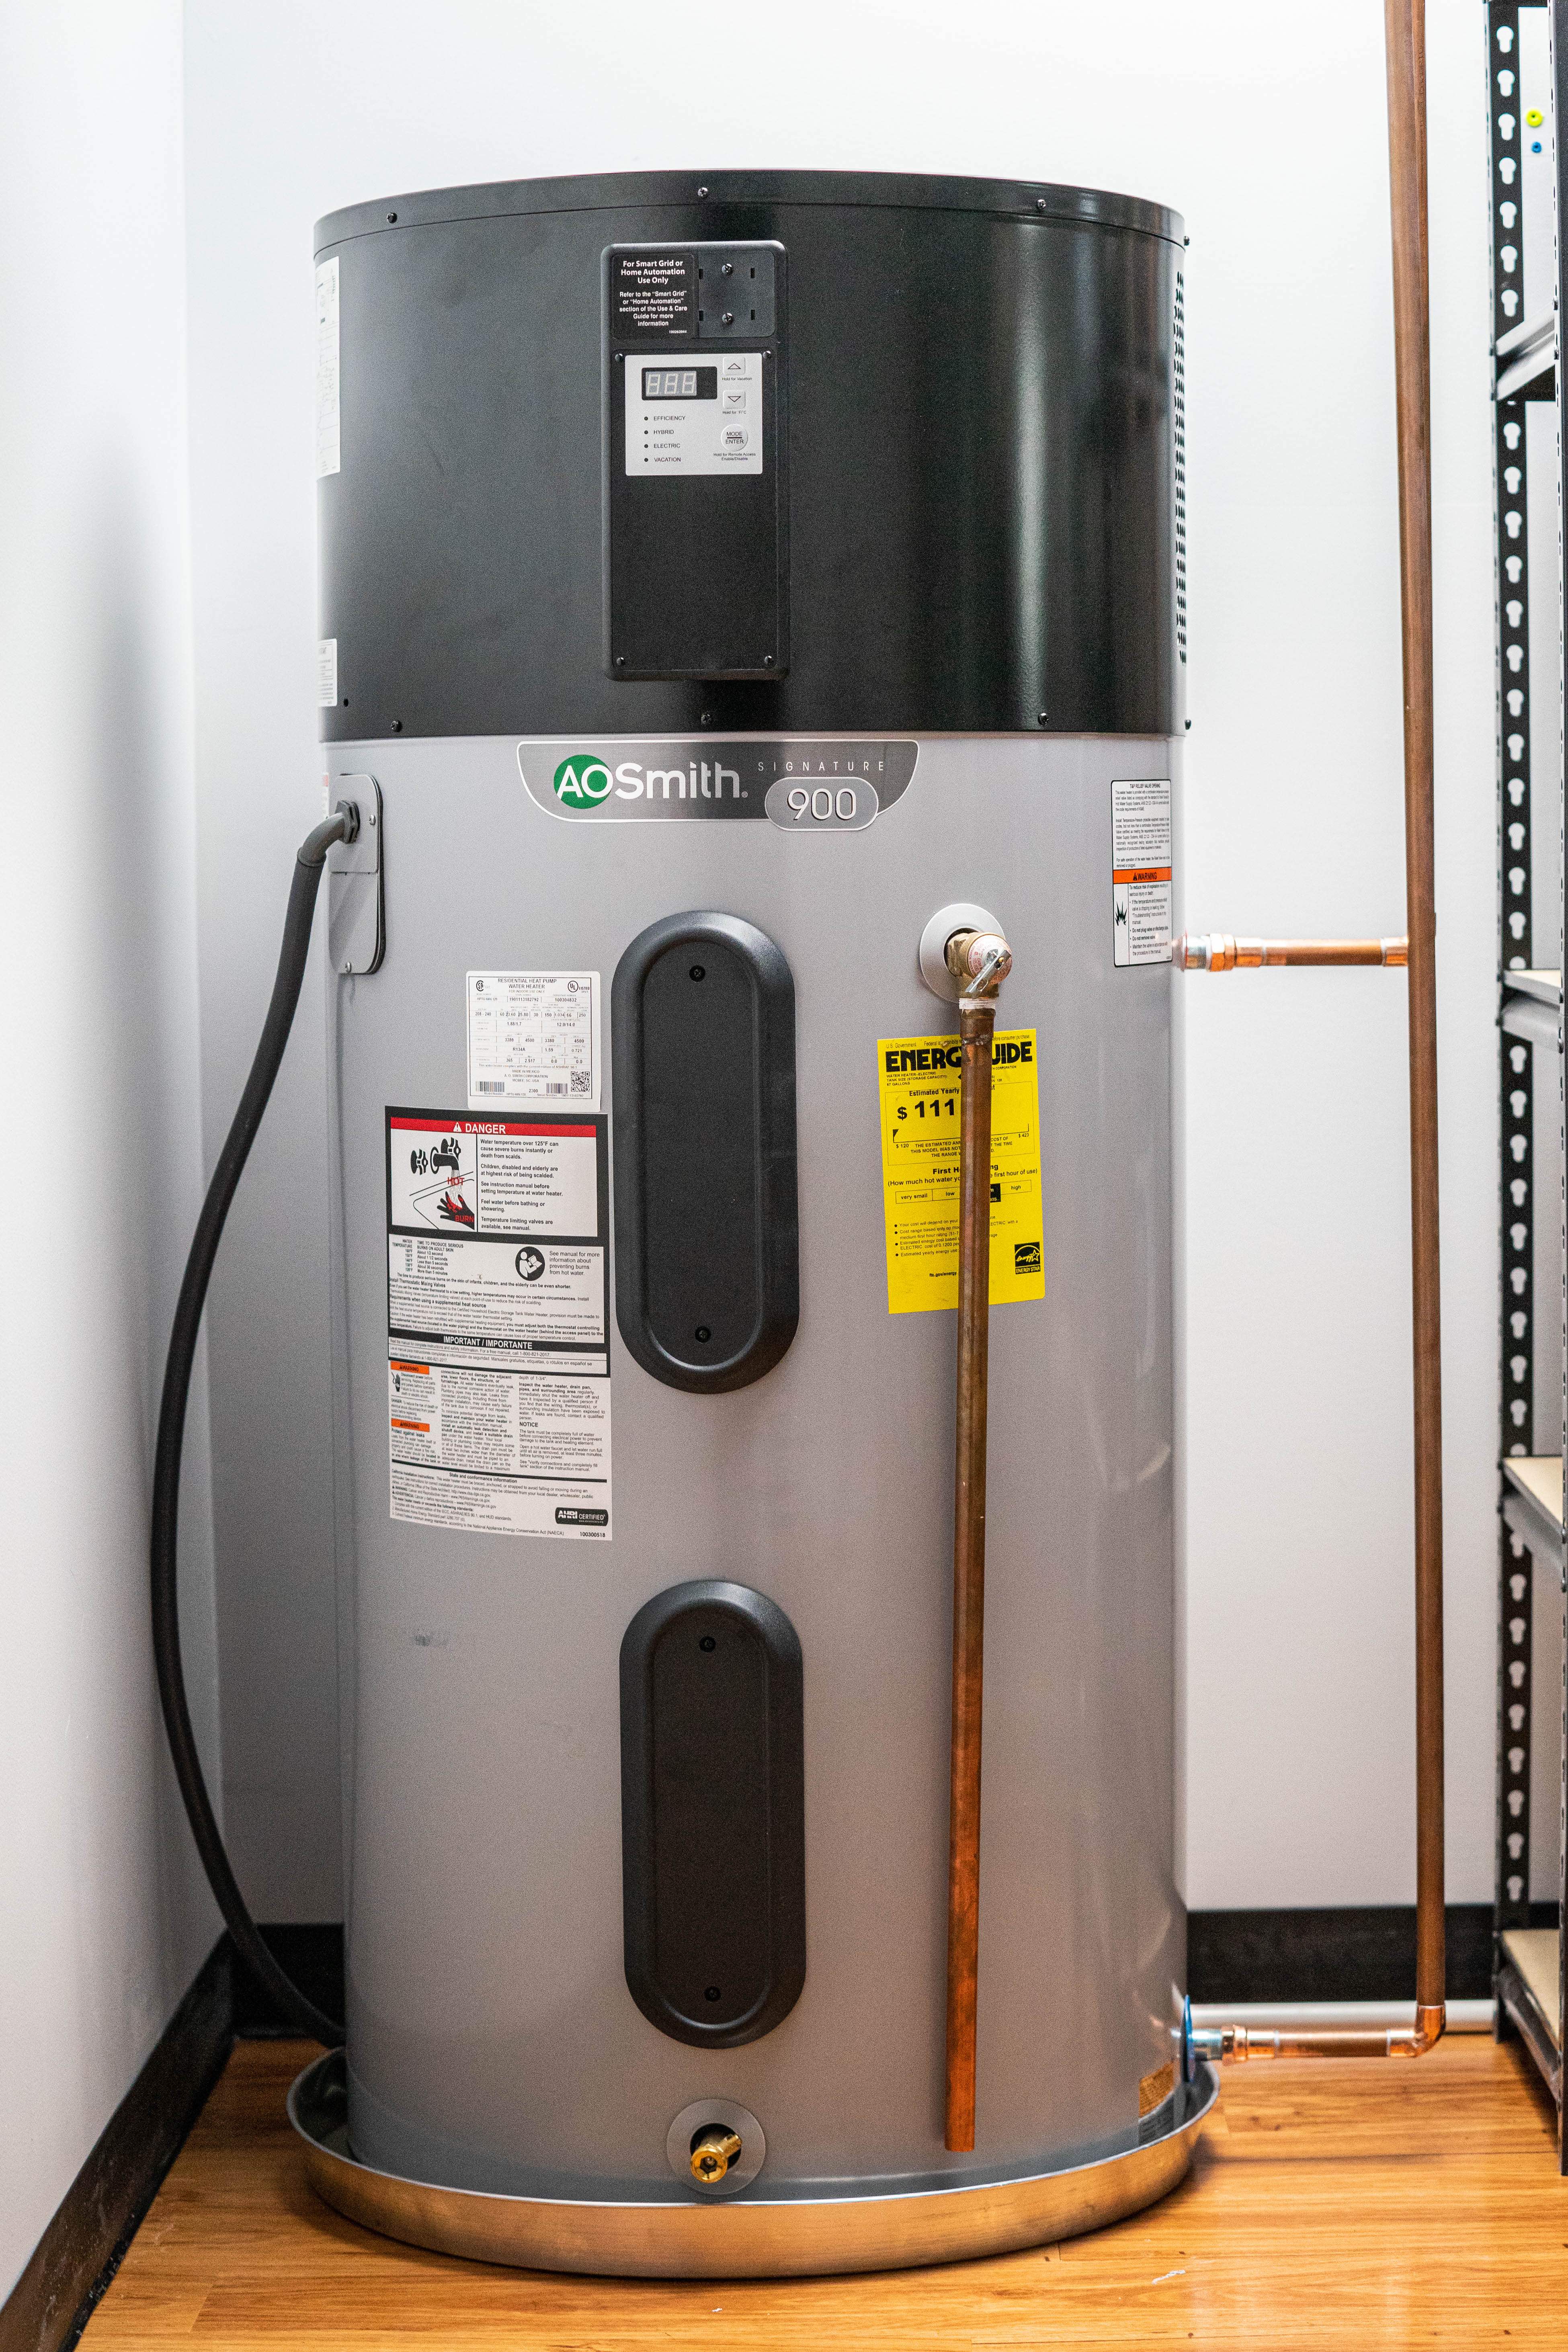 A. O. Smith Signature™ 900 Series Heat Pump Water Heaters